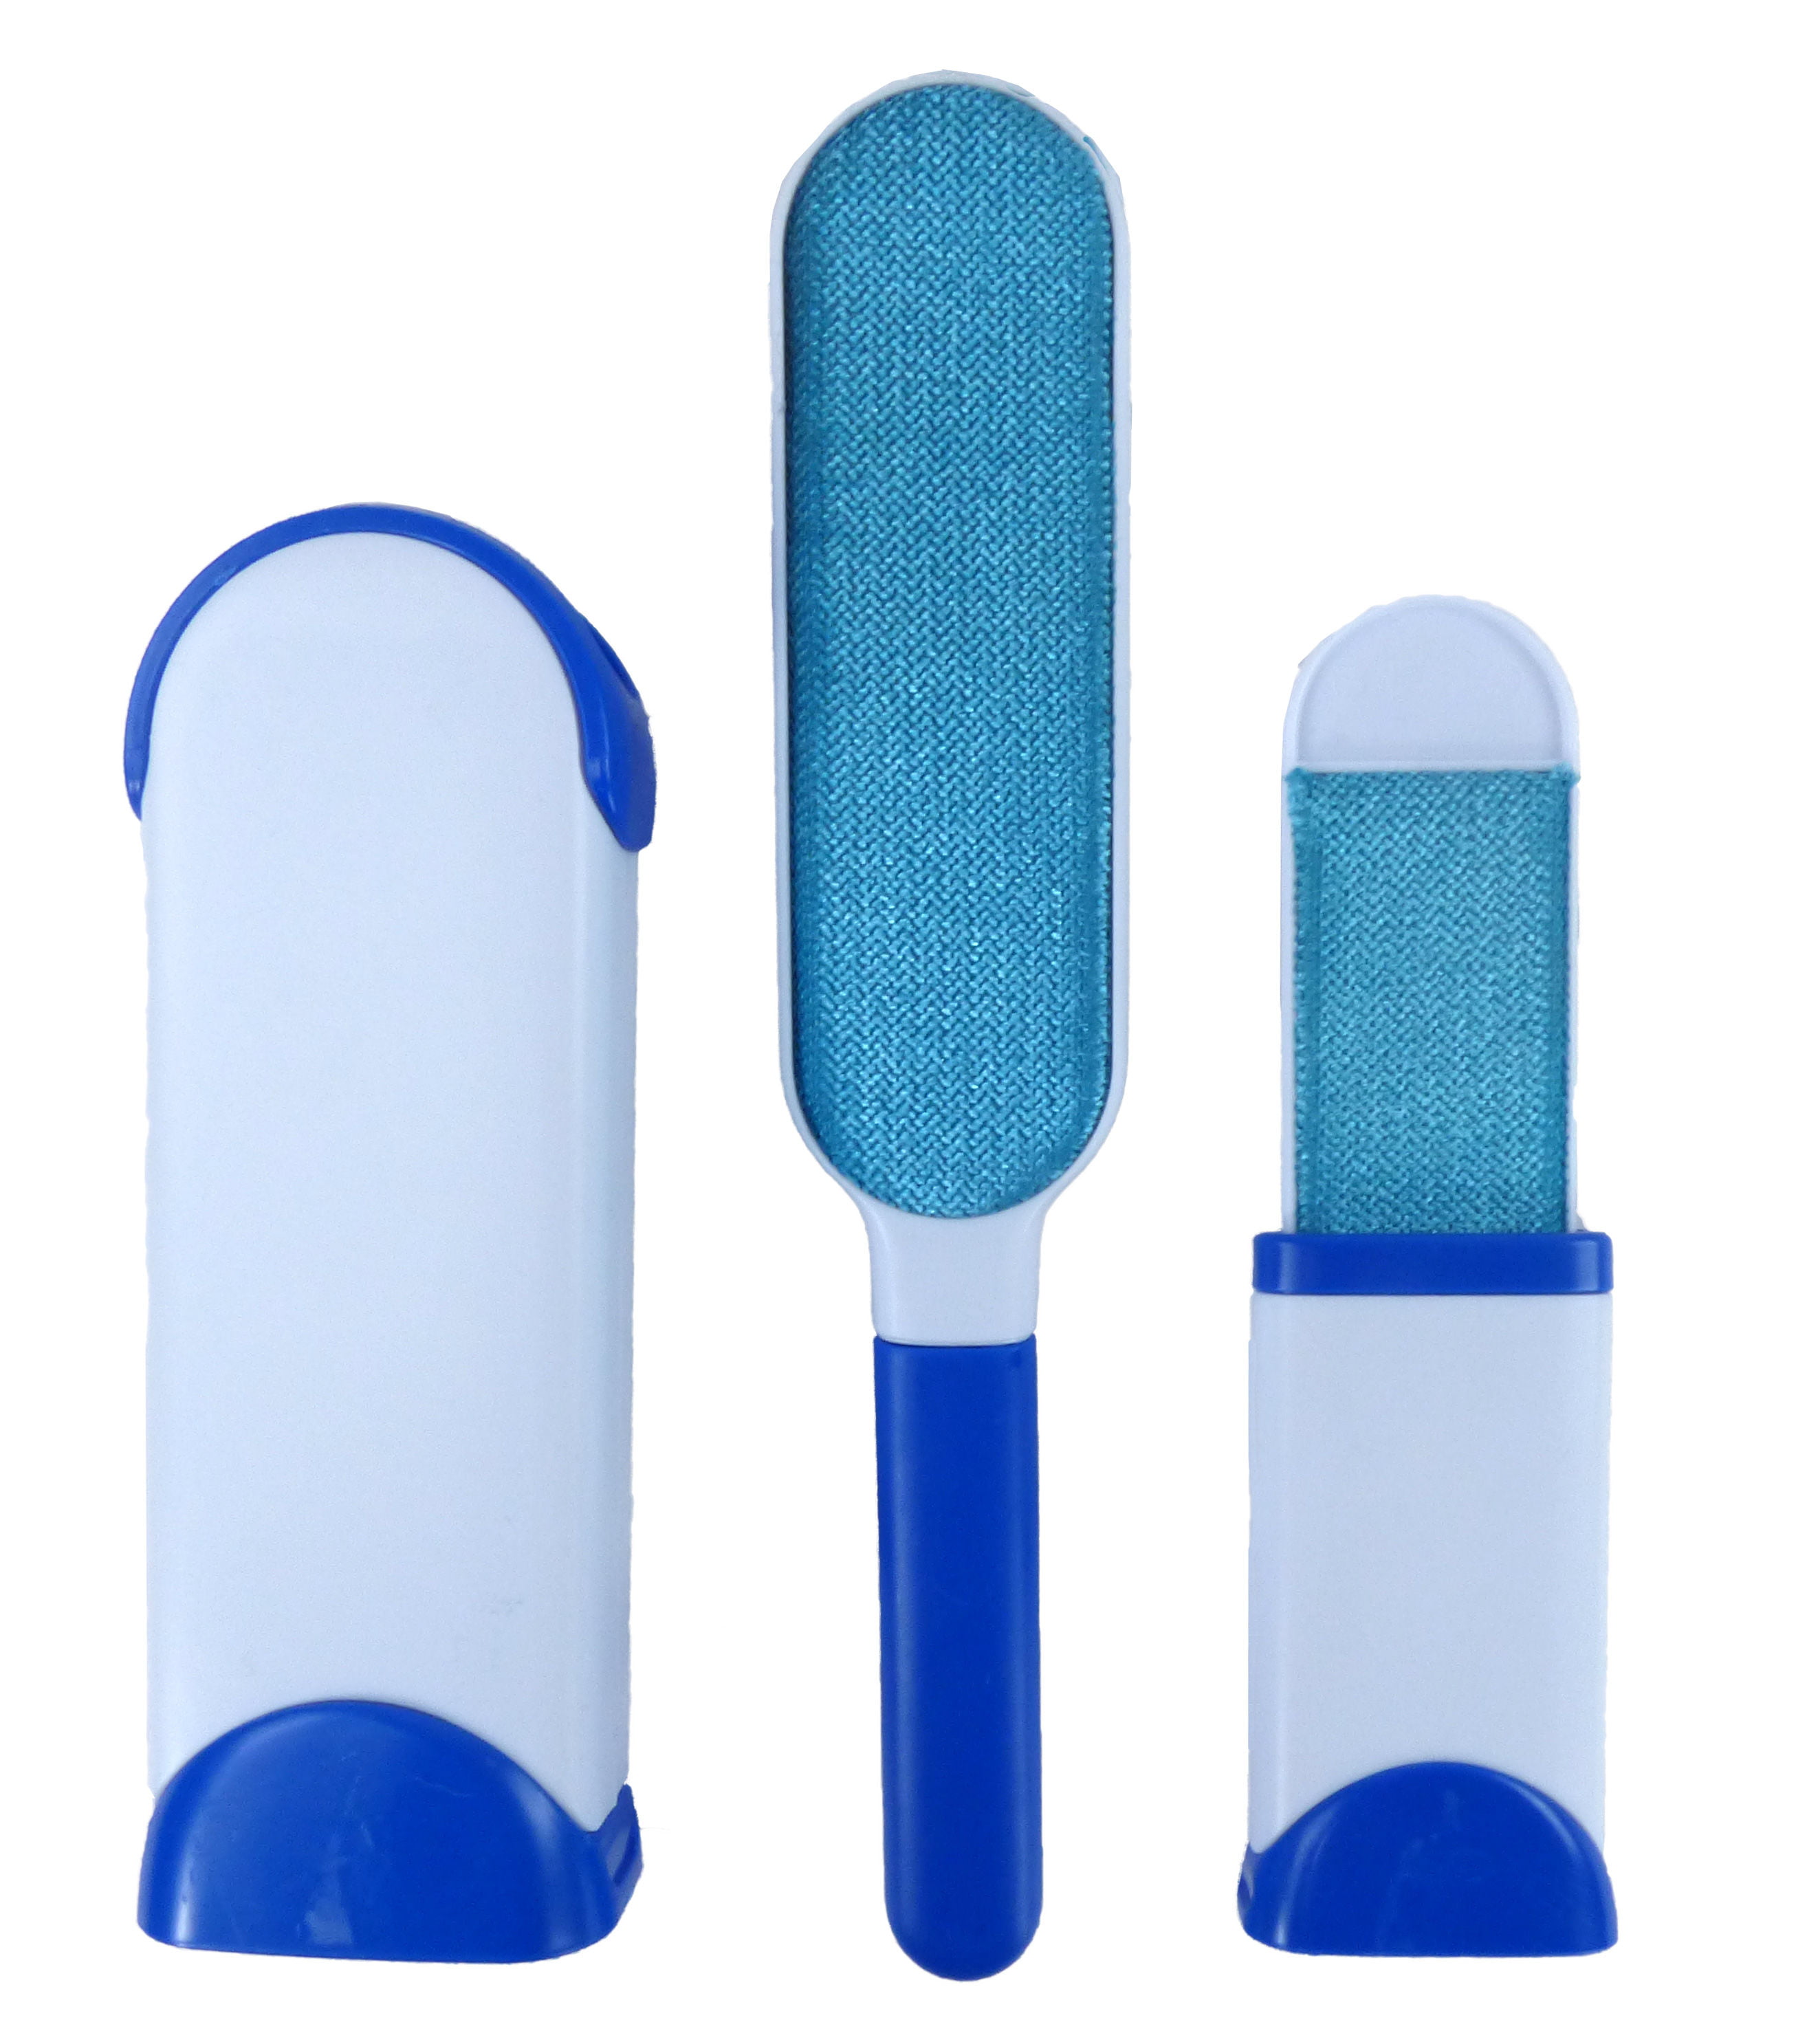 Blue Double Sided Reuseable Lint Brush with Travel Sized Cat/Dog/Pet Hair Remover for Couch Vesxae Pet Hair Remover Furniture Laundry 